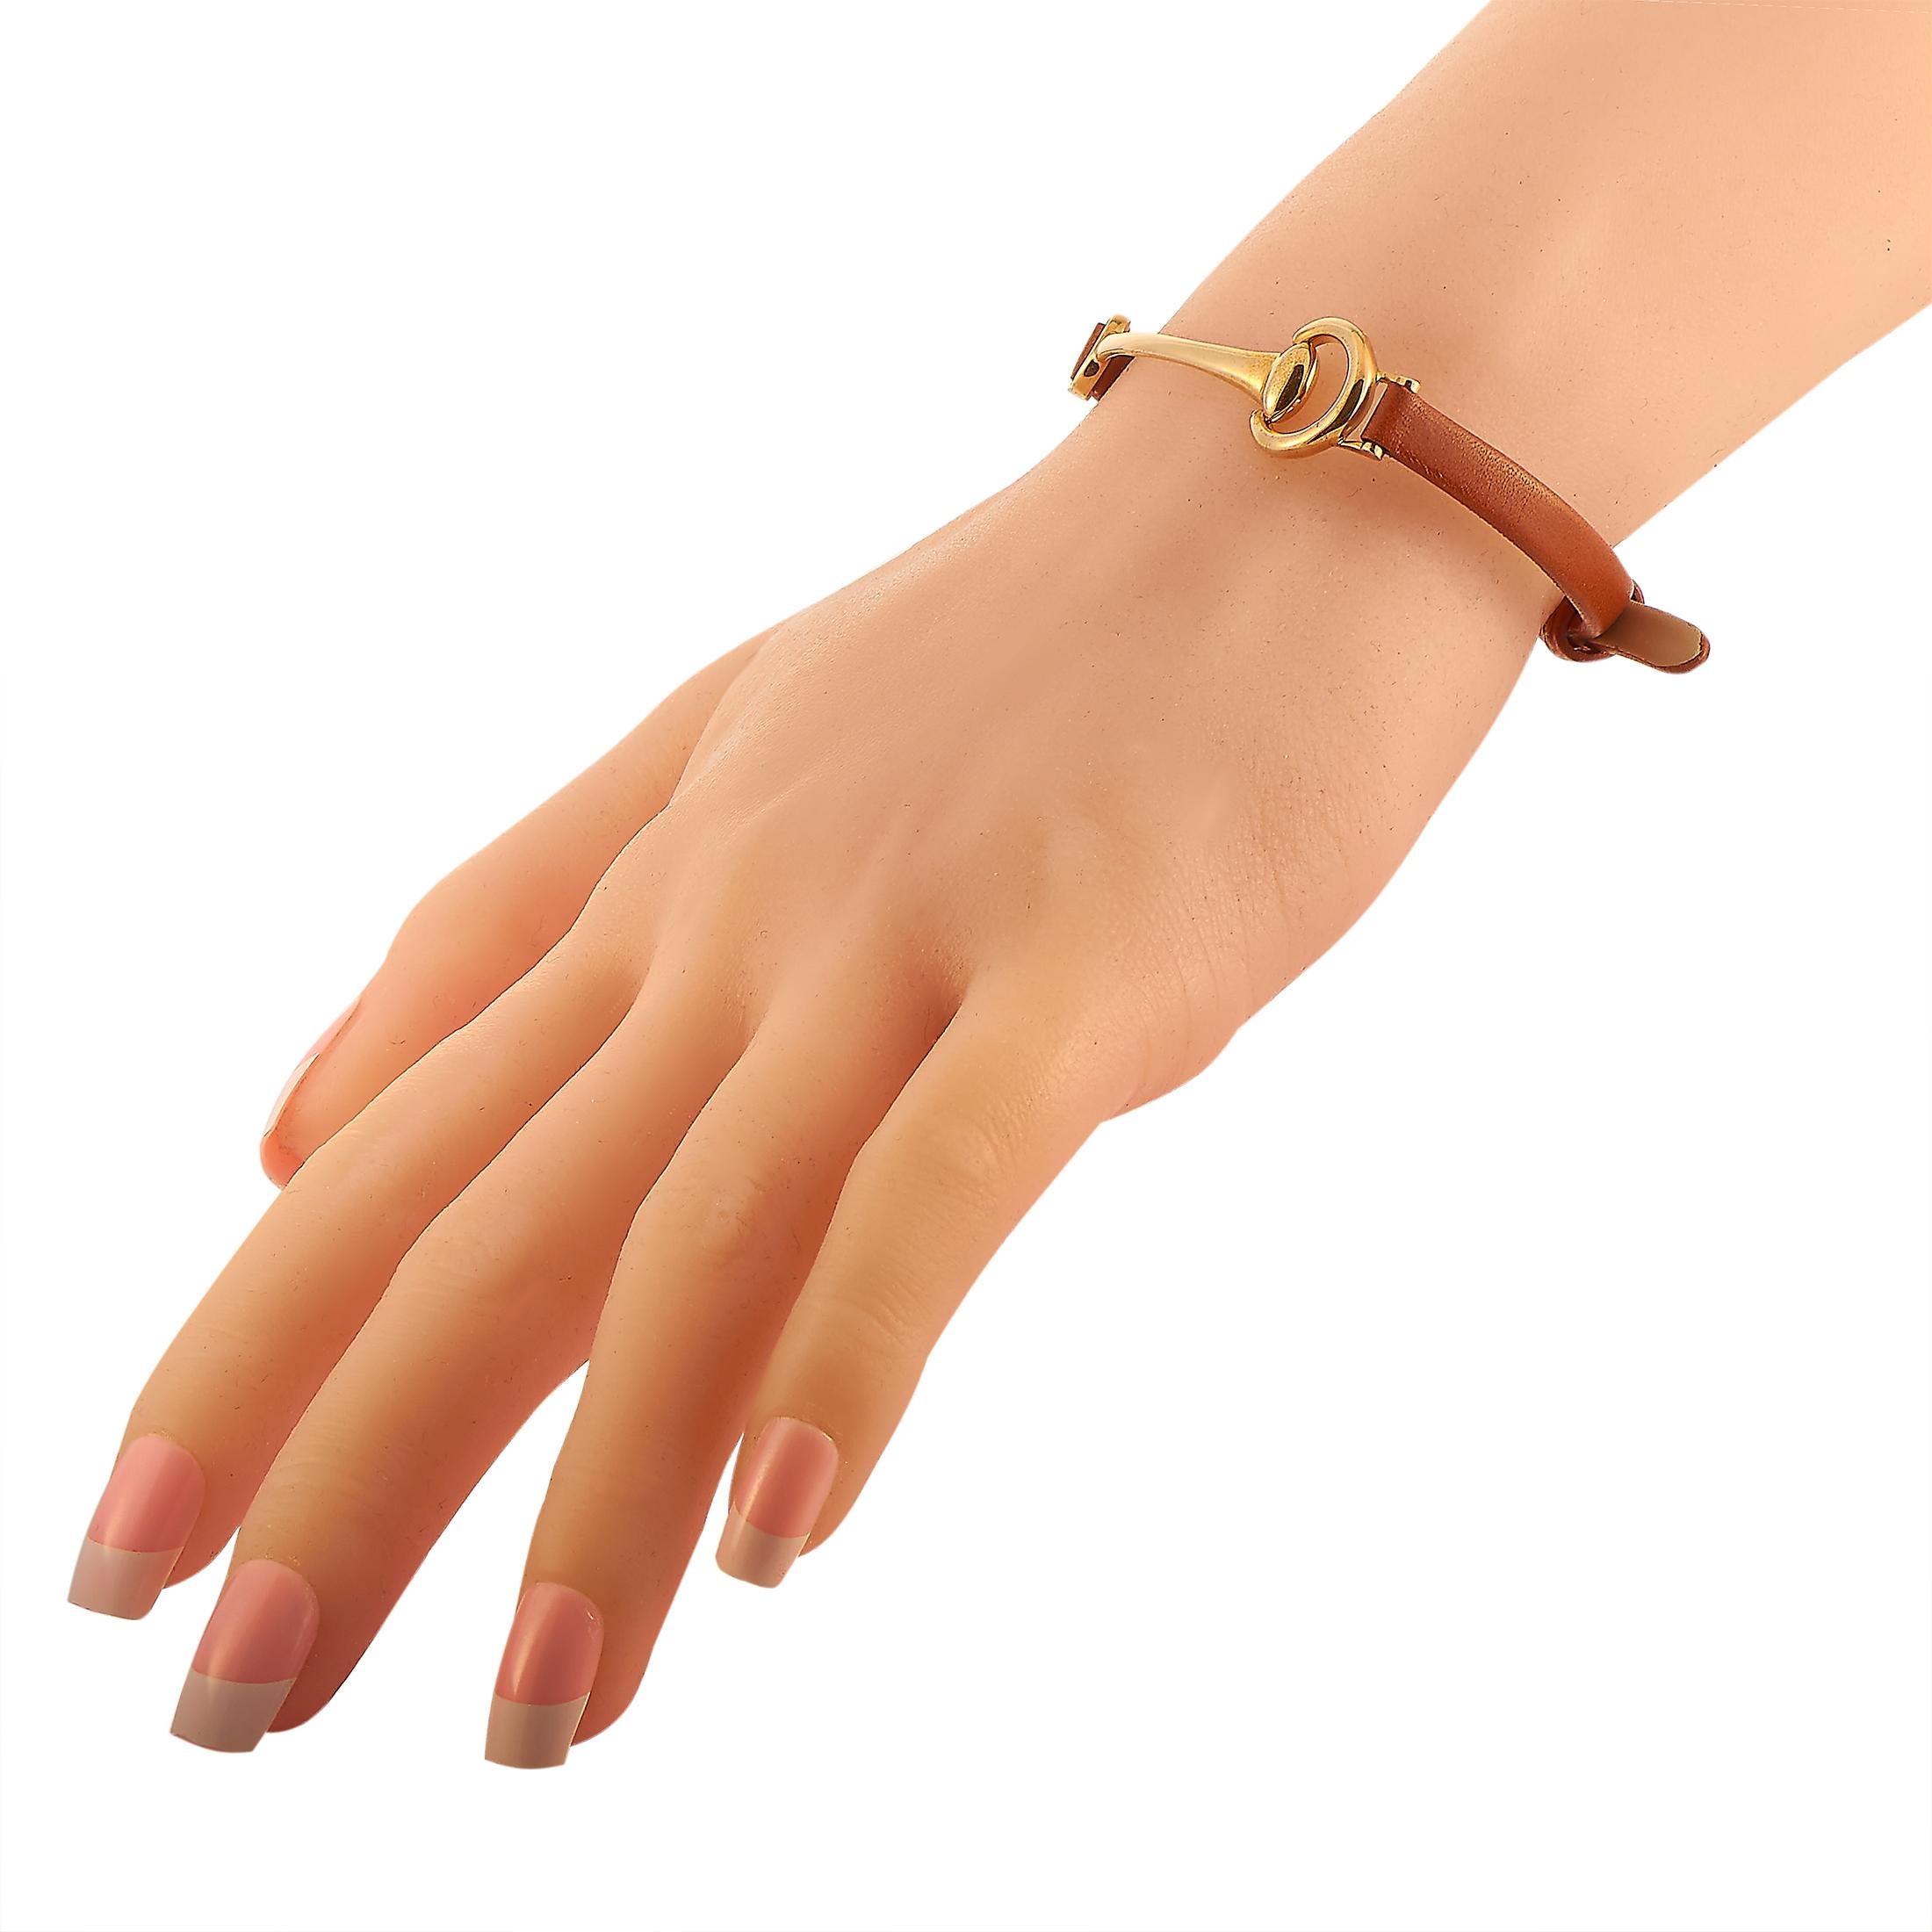 This Ubaldi bracelet is made out of 18K rose gold and red leather and weighs 8.1 grams, measuring 8.50” in length.

The bracelet is offered in brand new condition and includes a gift box.